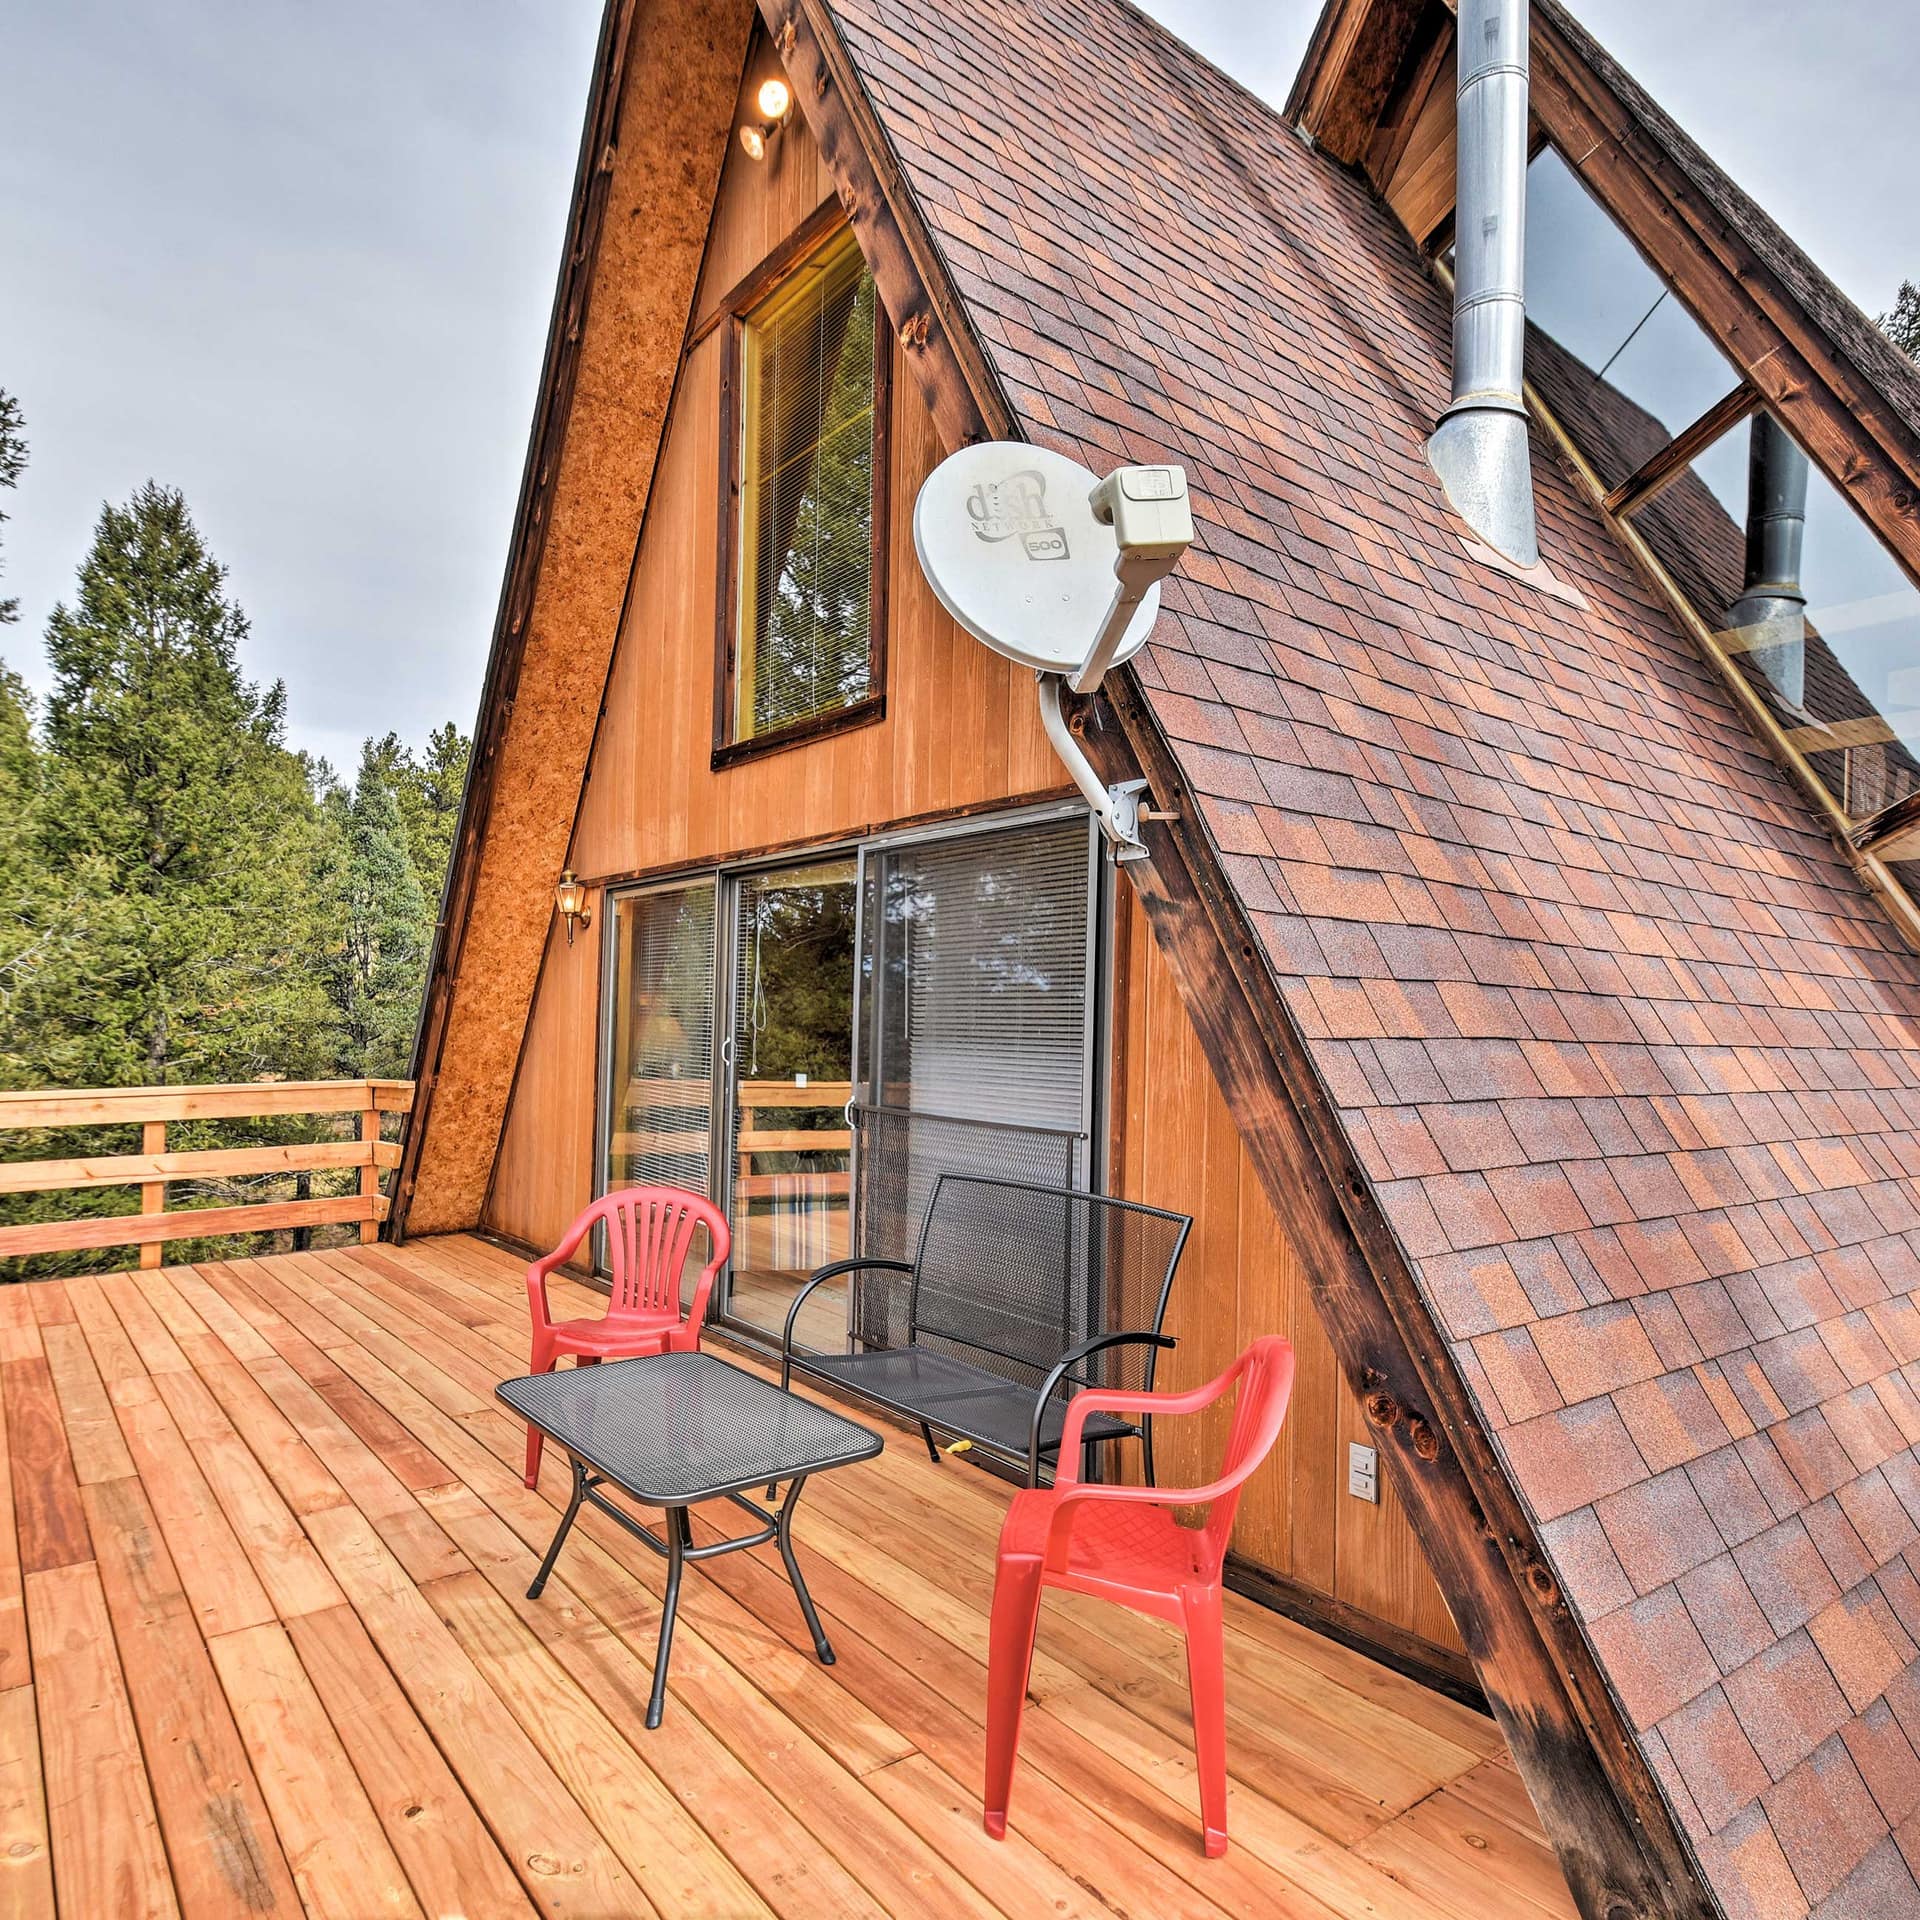 Rustic A-frame cabin with sunny deck near Pikes Peak in Colorado Springs